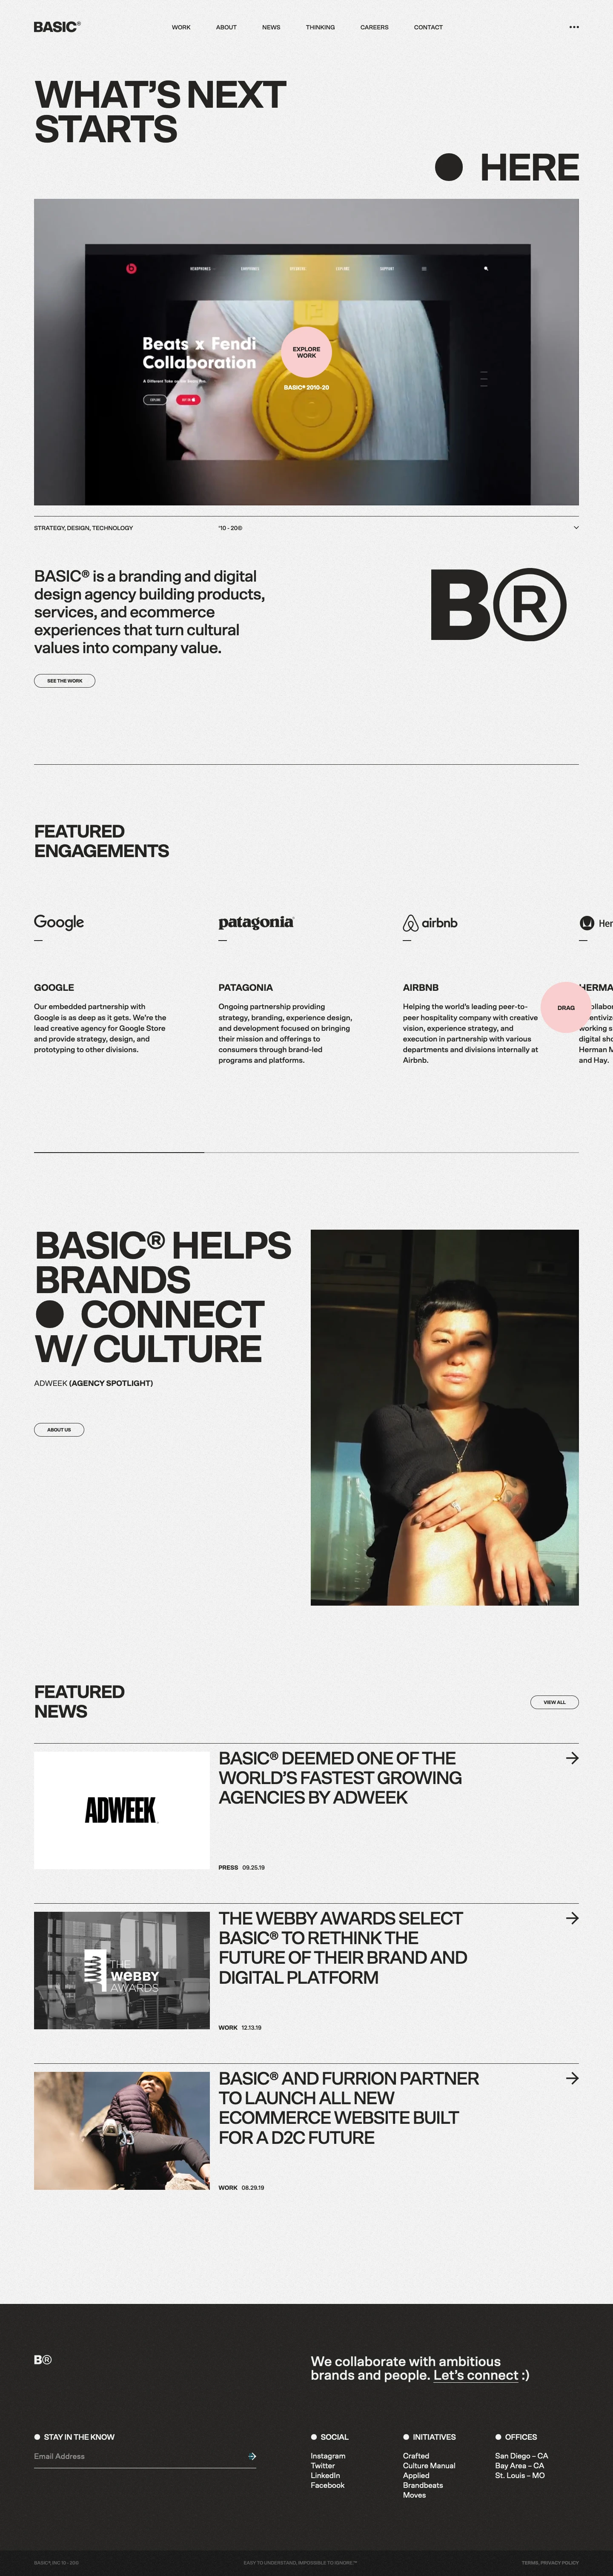 BASIC Landing Page Example: BASIC® is a branding and digital design agency building products, services, and ecommerce experiences that turn cultural values into company value.